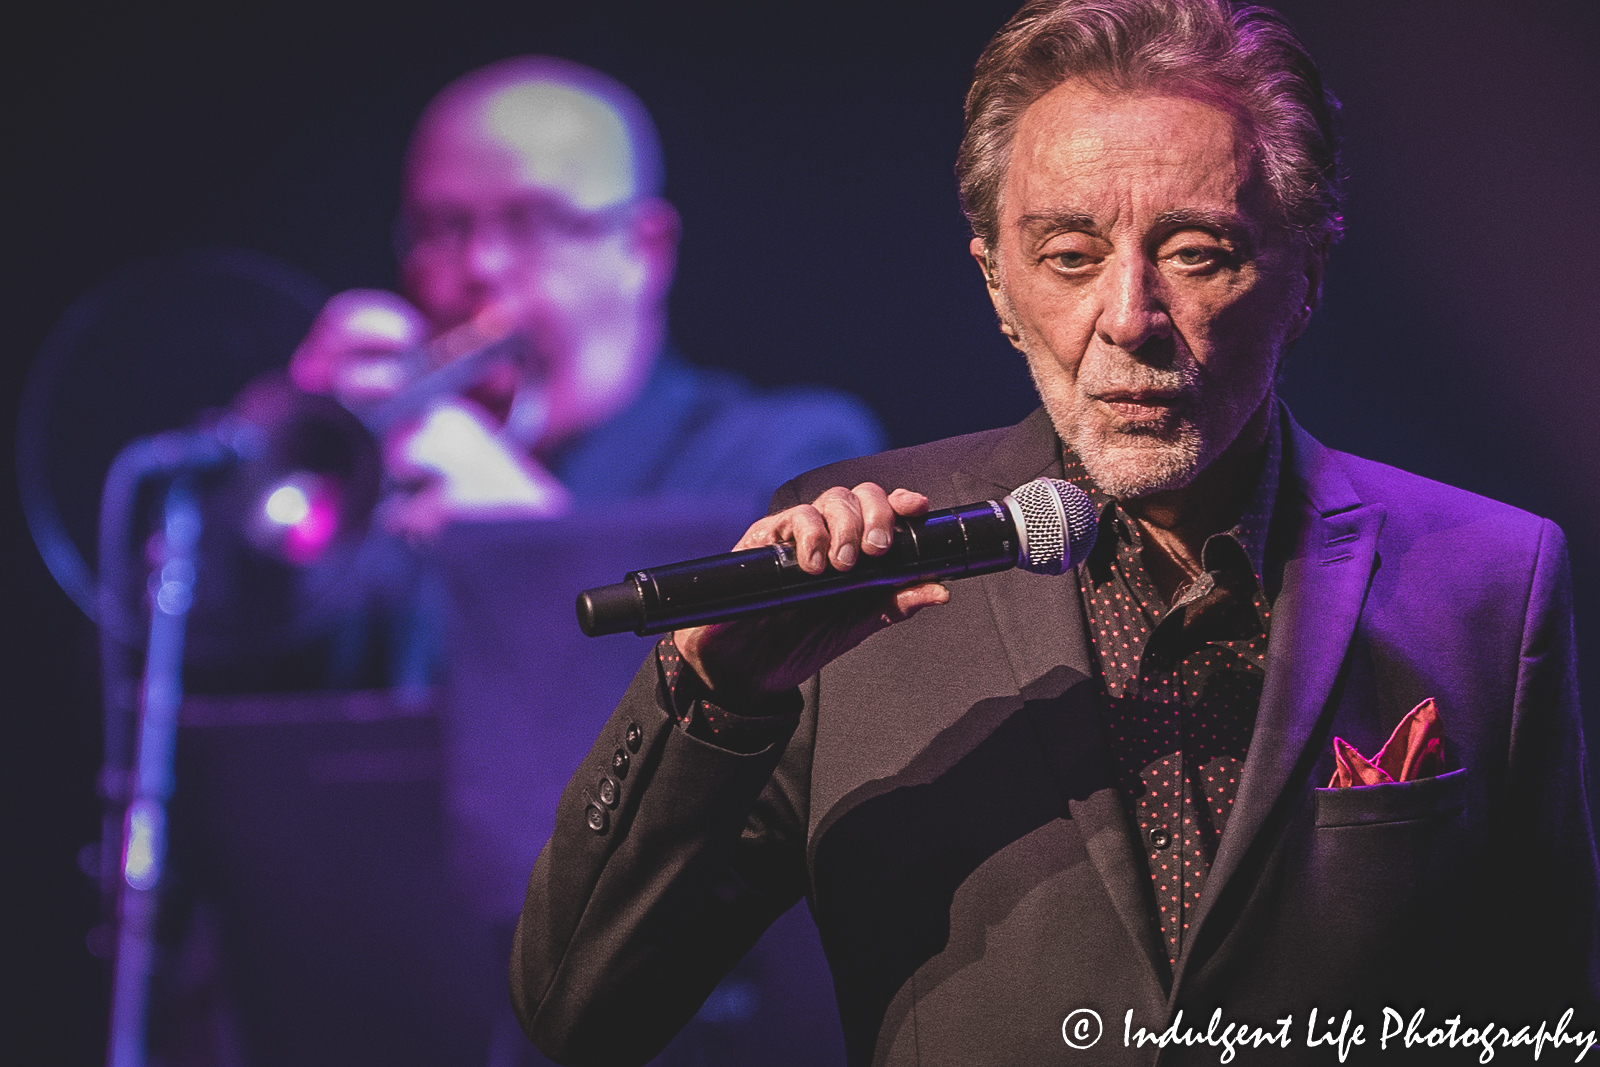 Frankie Valli performing with his trumpet player at Kauffman Center for the Performing Arts in downtown Kansas City, MO on June 4, 2022.